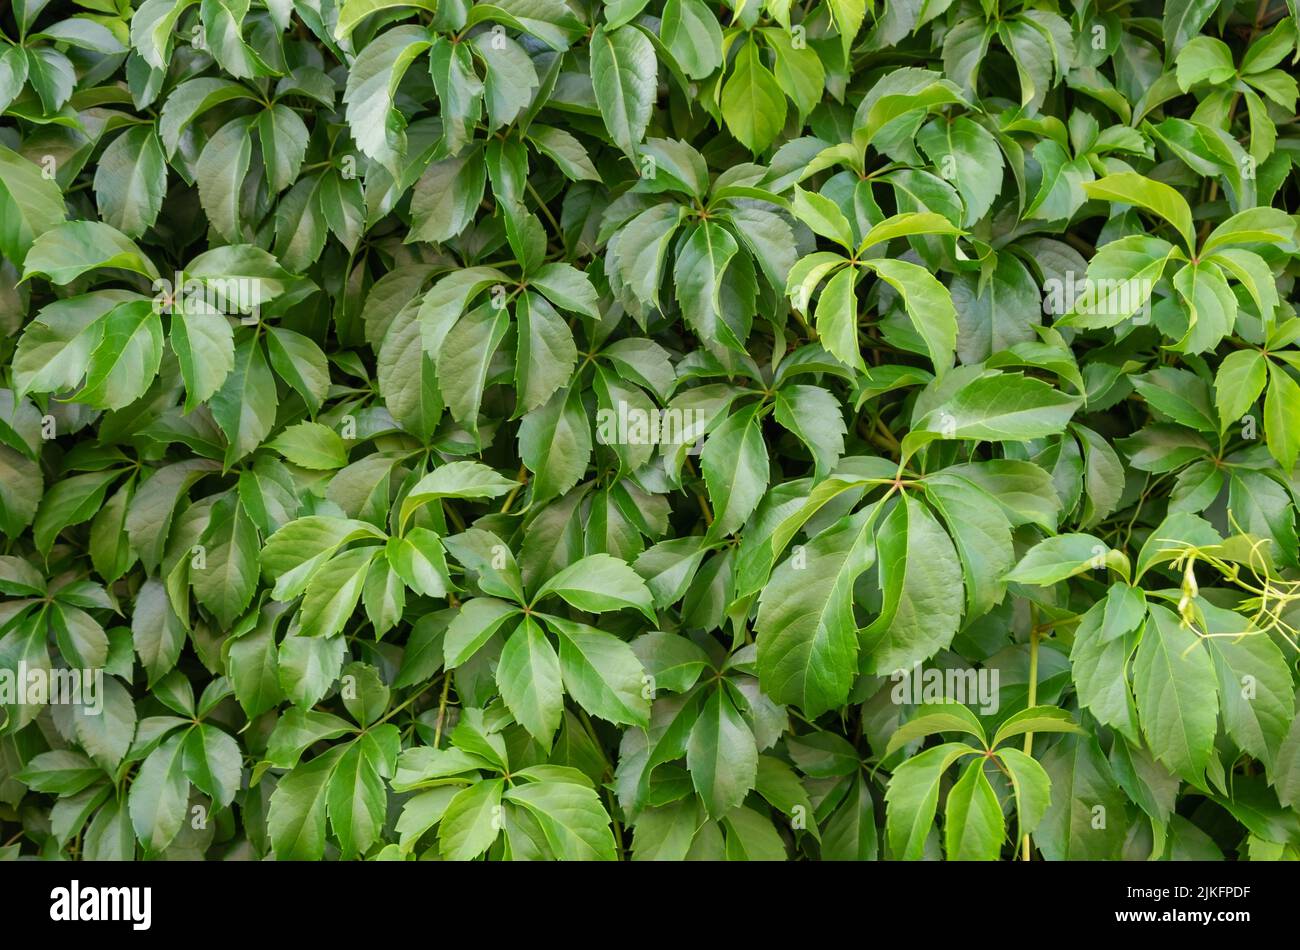 A fast growing hardy vine covering a wall, cissus striata. Stock Photo